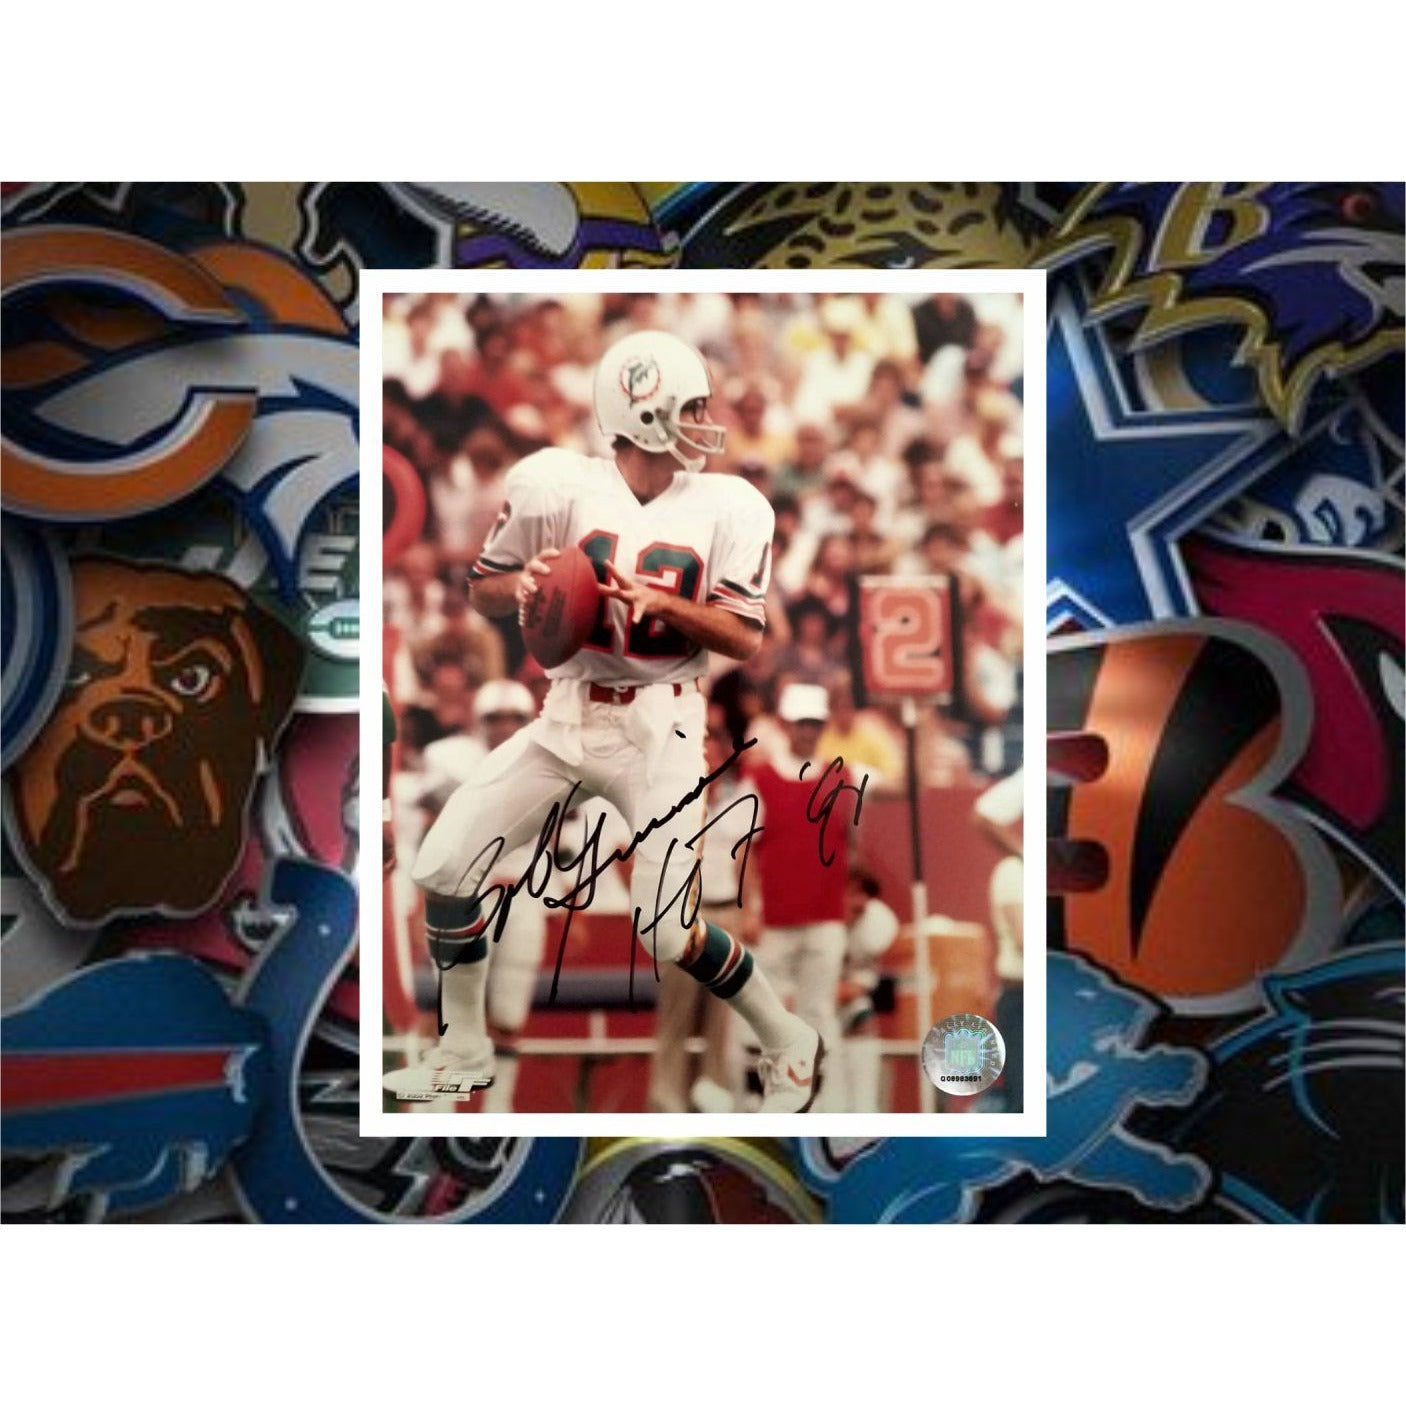 Bob Griese Miami Dolphins Hall of Fame quarterback 8x10 photo signed with proof